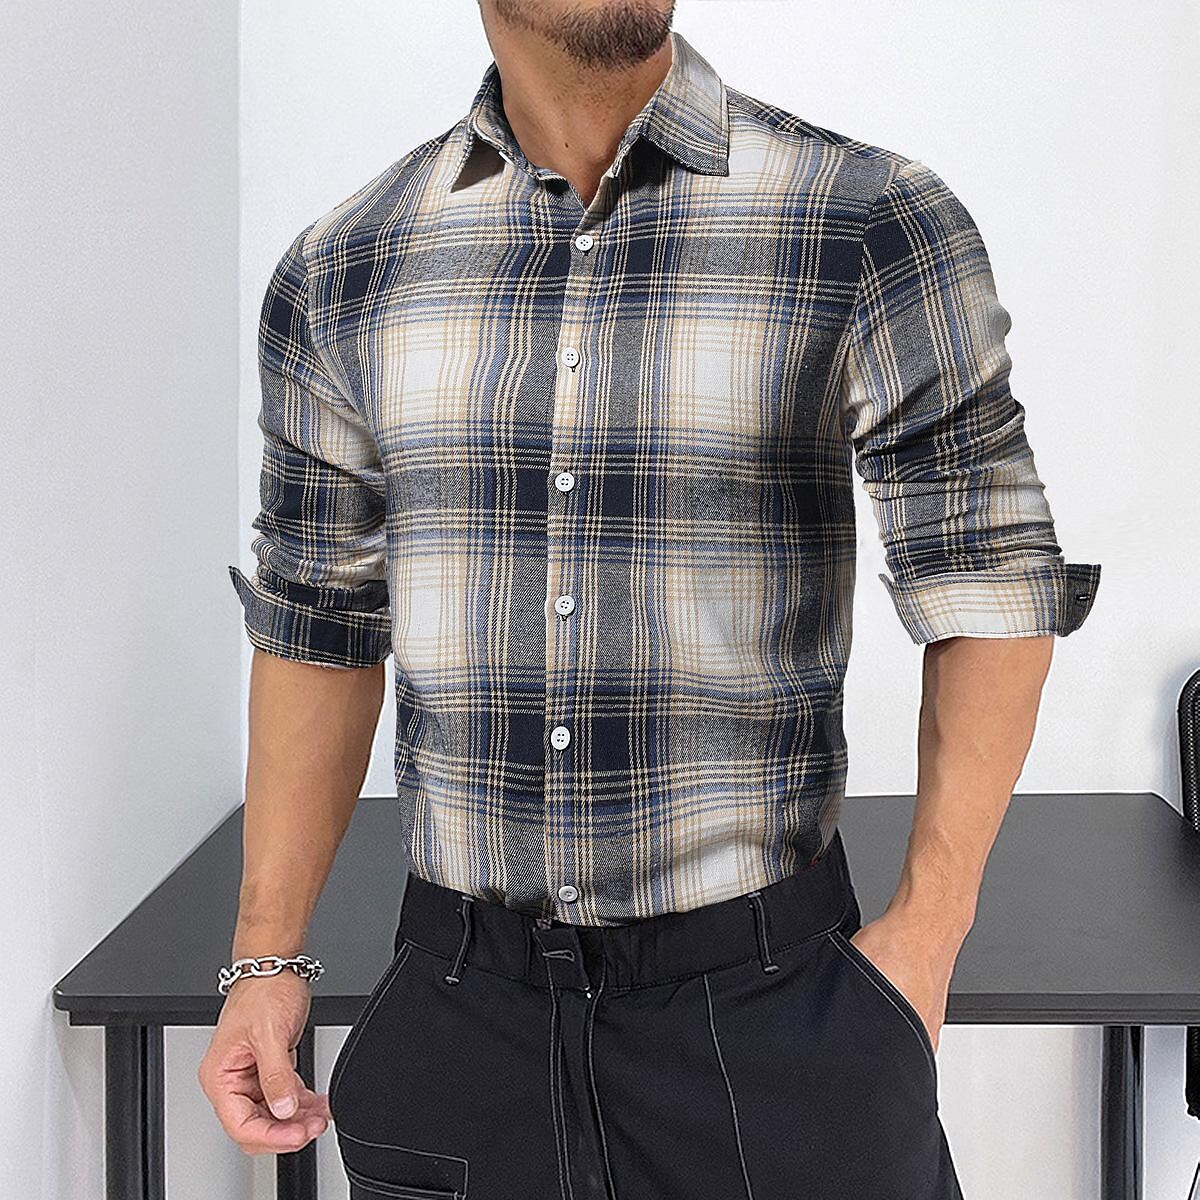 Poisonstreetwear Men's Brushed Flannel Check Long Sleeve Shirt Simple Basic Casual Classic Gray-poisonstreetwear.com